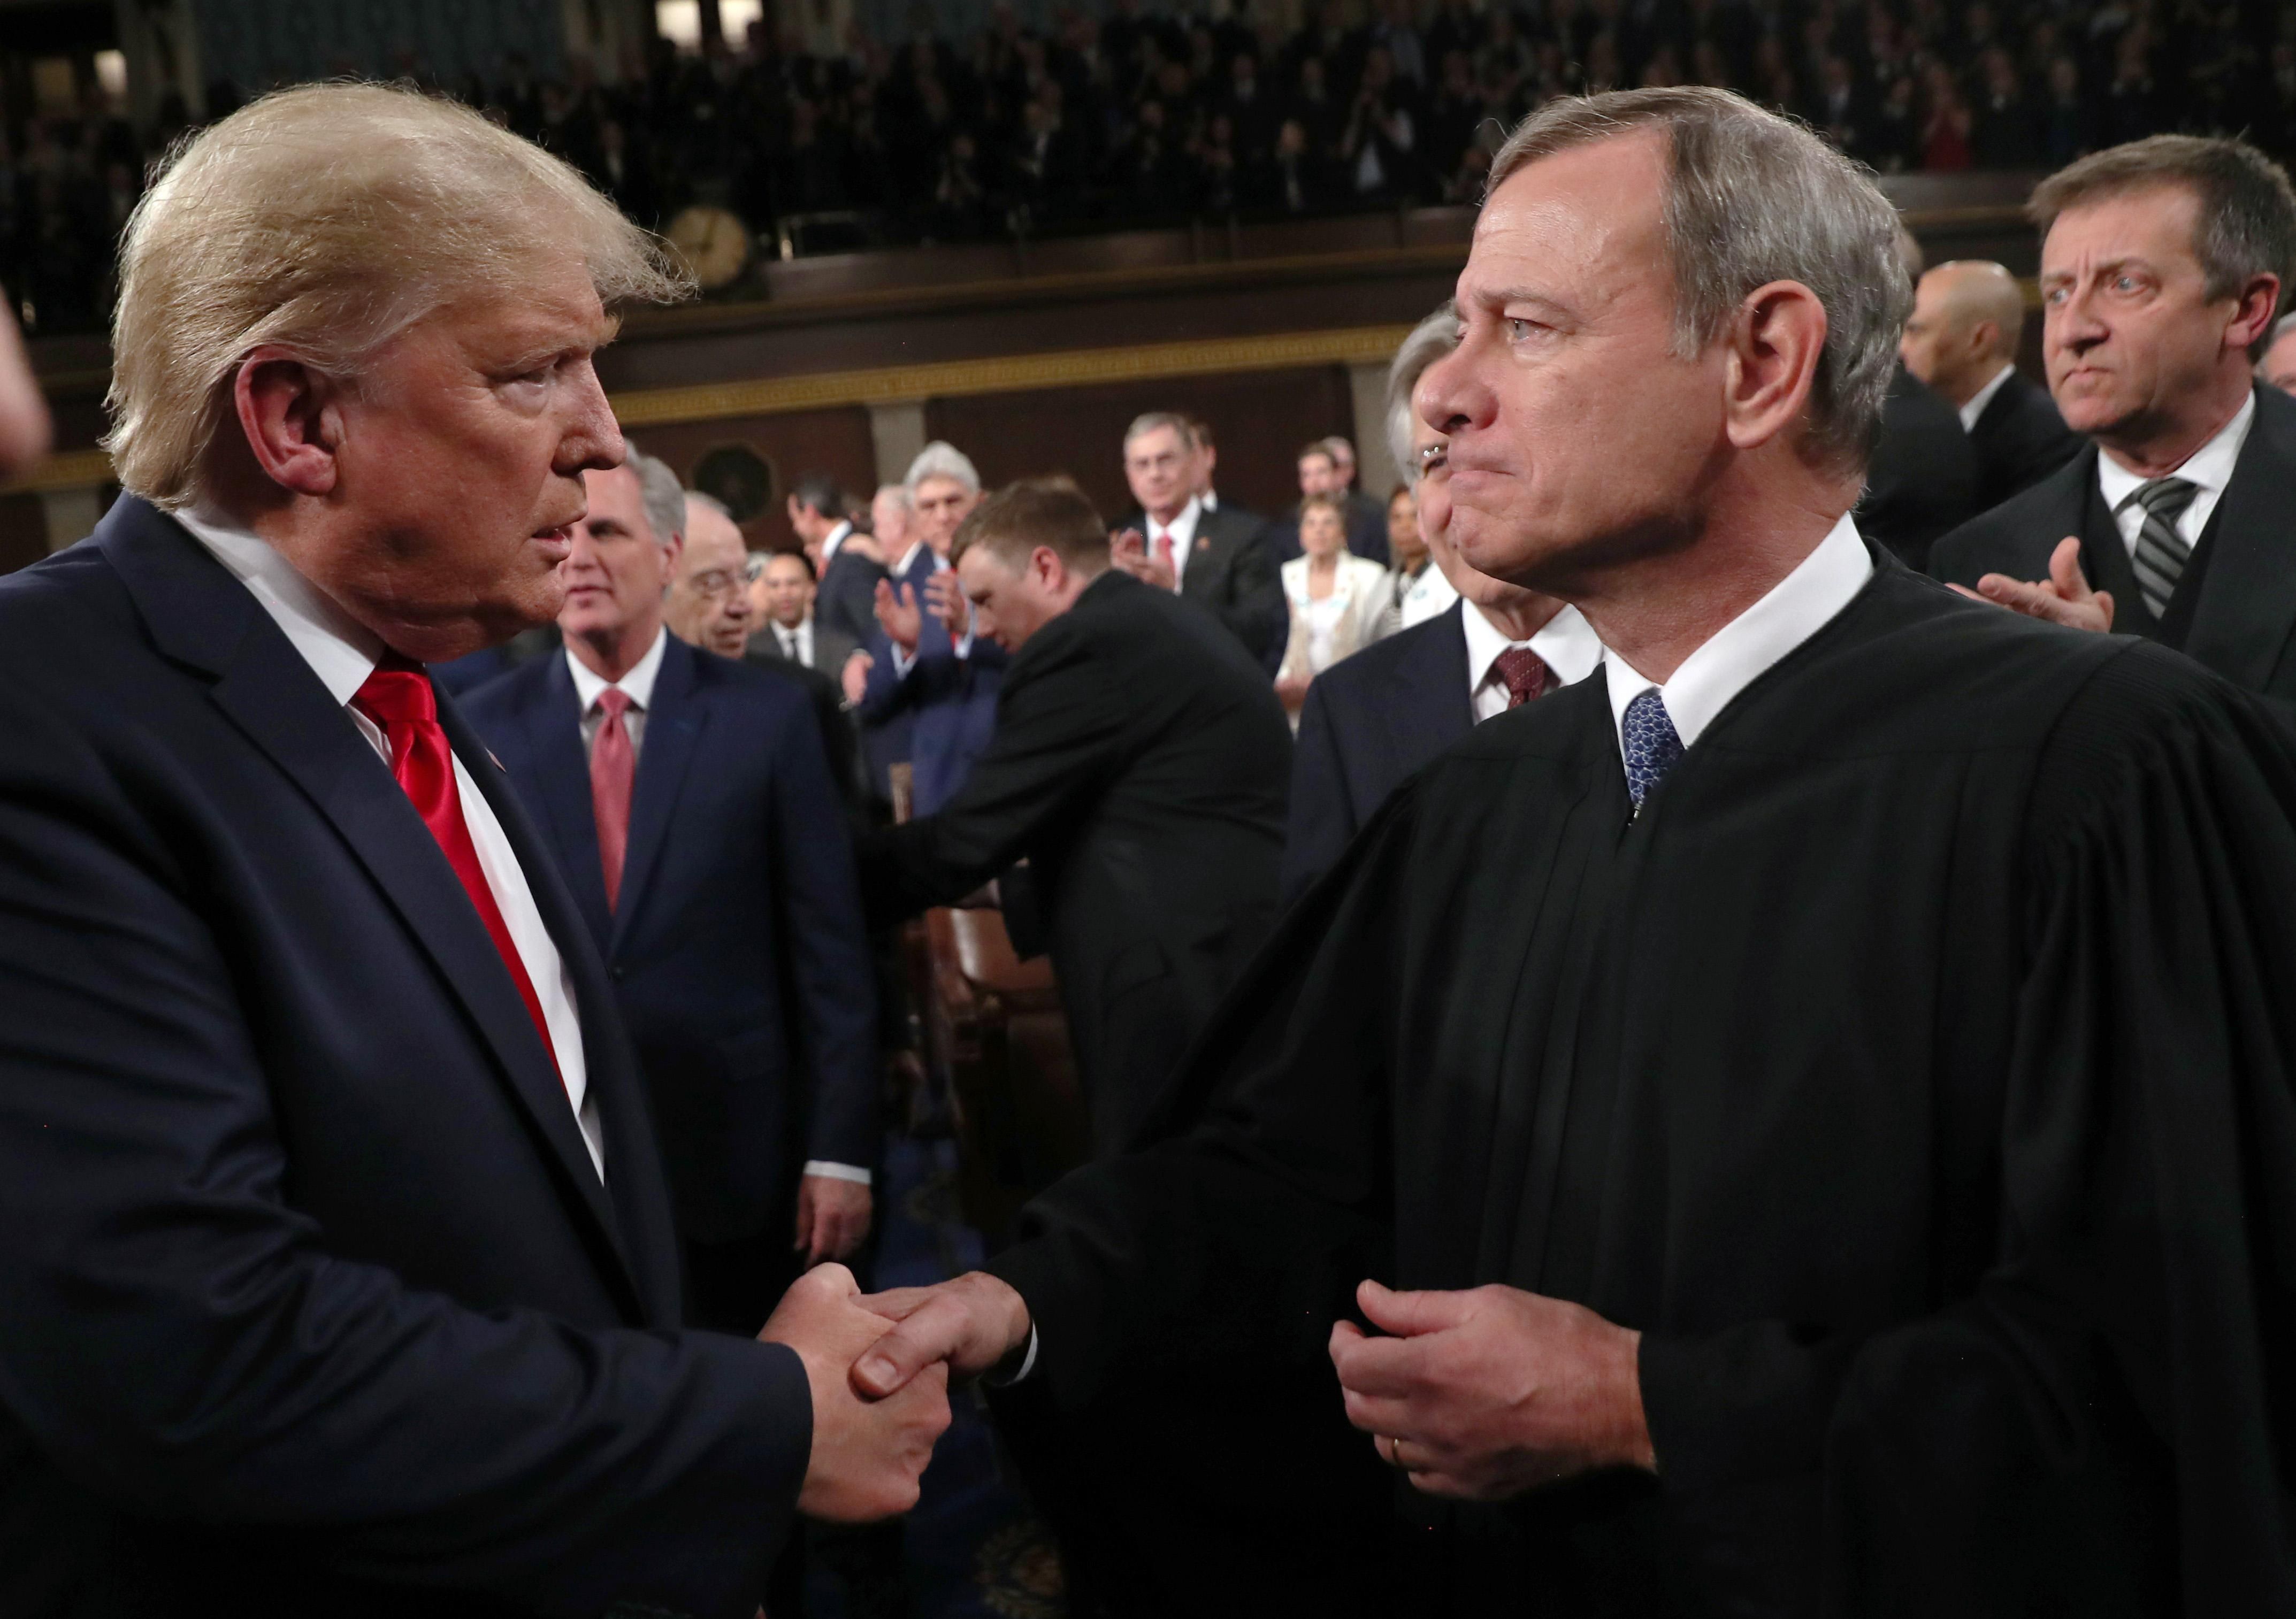 Chief Justice John Roberts shaking hands with former President Donald Trump